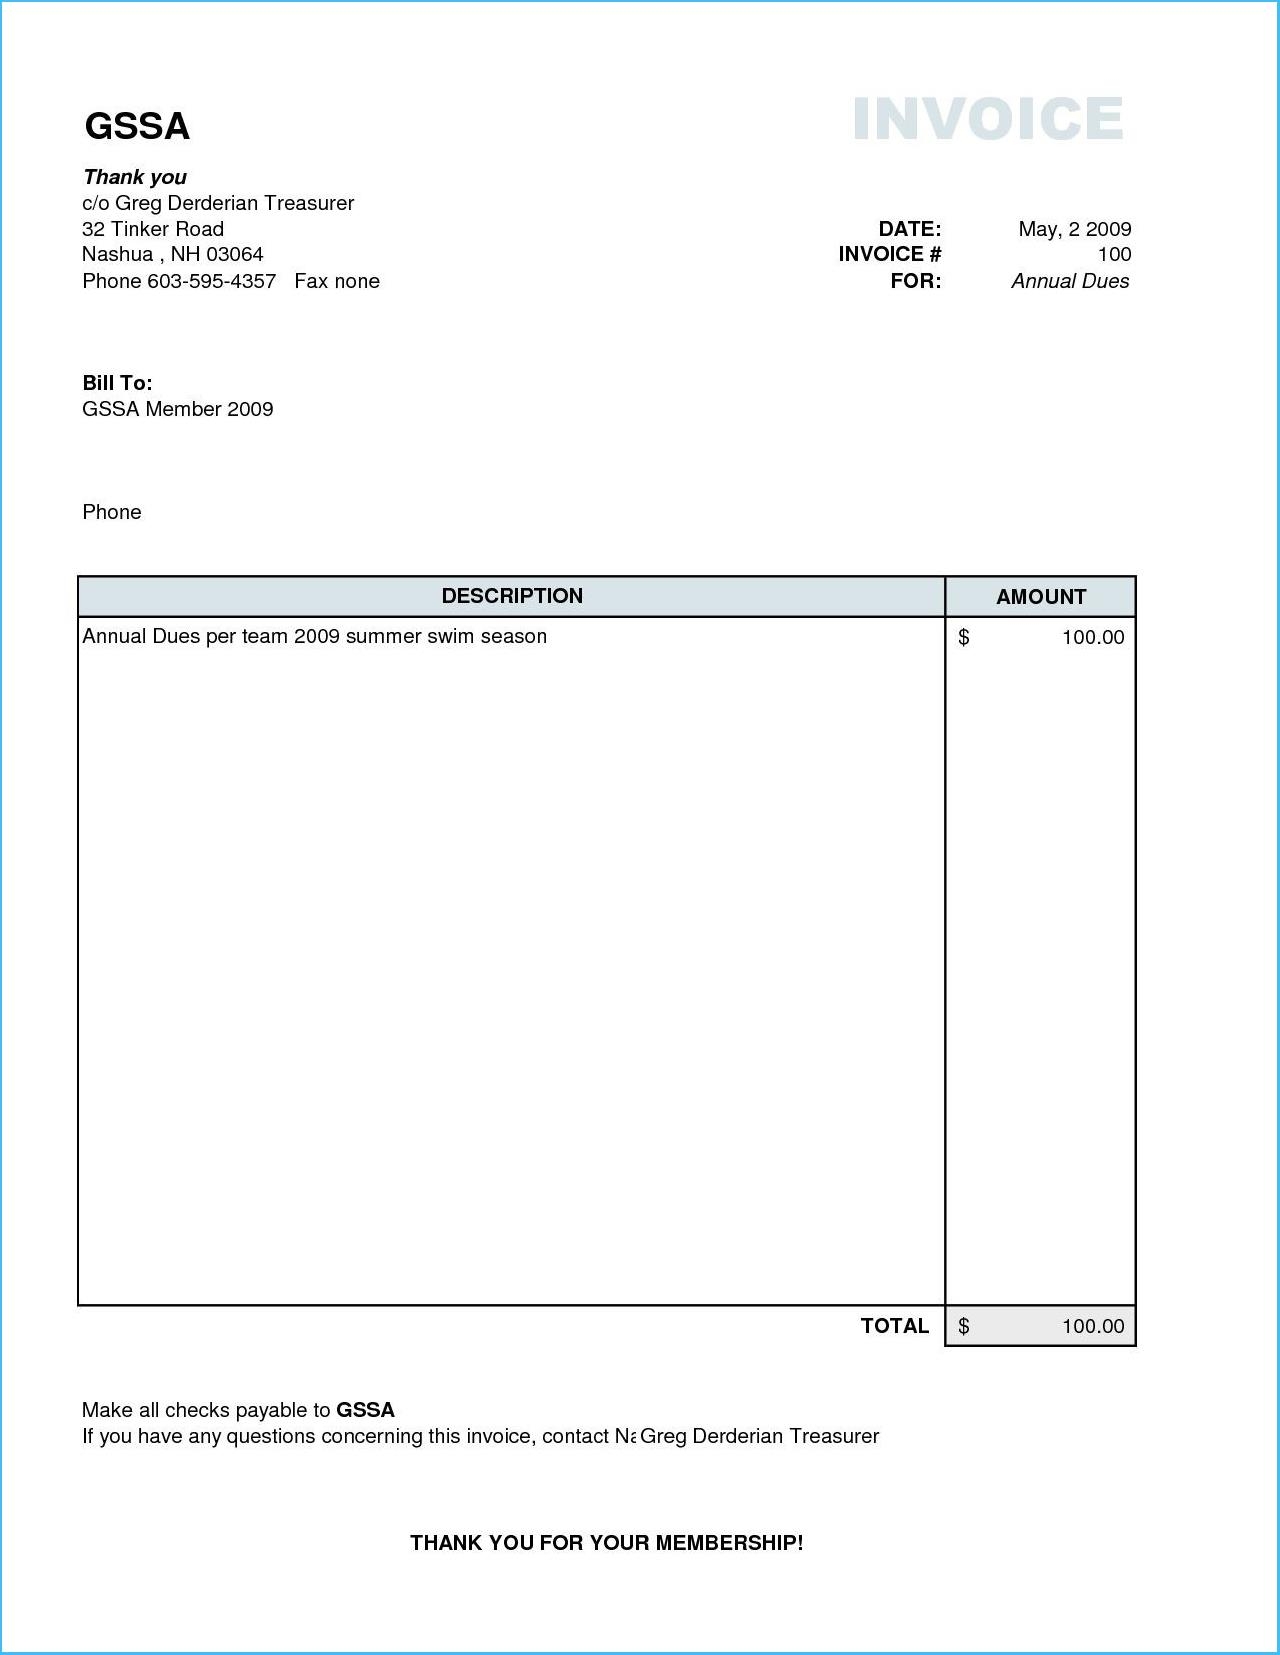 022 20invoice examples free blank template uk printable free simple invoice form